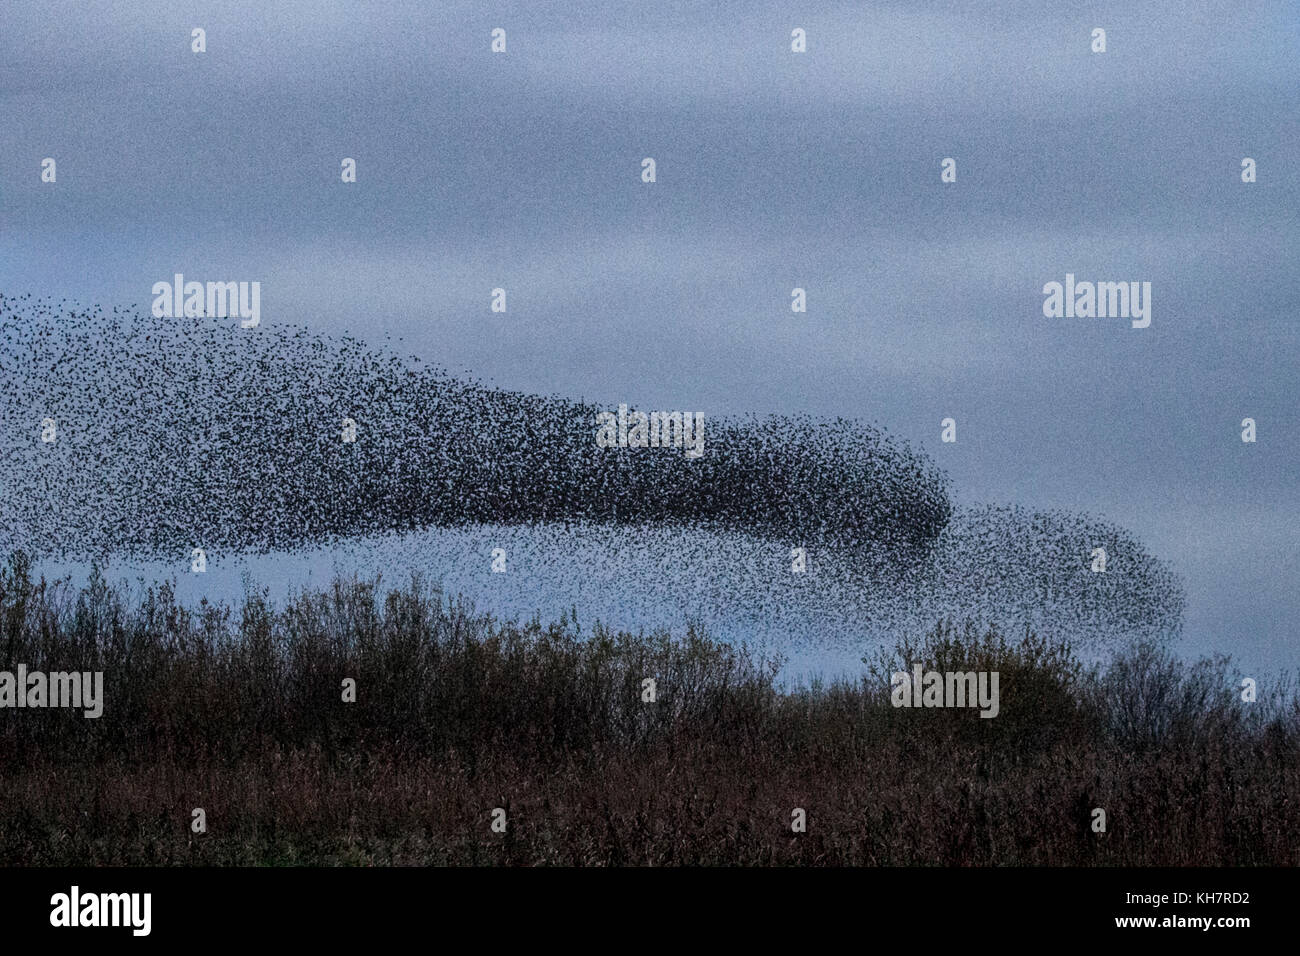 Burscough, Merseyside, UK Weather 15th November, 2017. Spectacular Starling flocks mumurate over Martin Mere nature reserve at sunset as an estimated 50 thousand starlings gather at the onset of a cold winter, and the early nights trigger this autumn gathering and groupings. The murmur or chatter, the interaction between the huge numbers as they fly, is quite intense and is thought to form part of a communication of sorts. These huge flocks are the largest seen in the last for 12 years and are attracting large numbers of birdwatchers to the area. Credit. MediaWorldImages/AlamyLiveNews Stock Photo